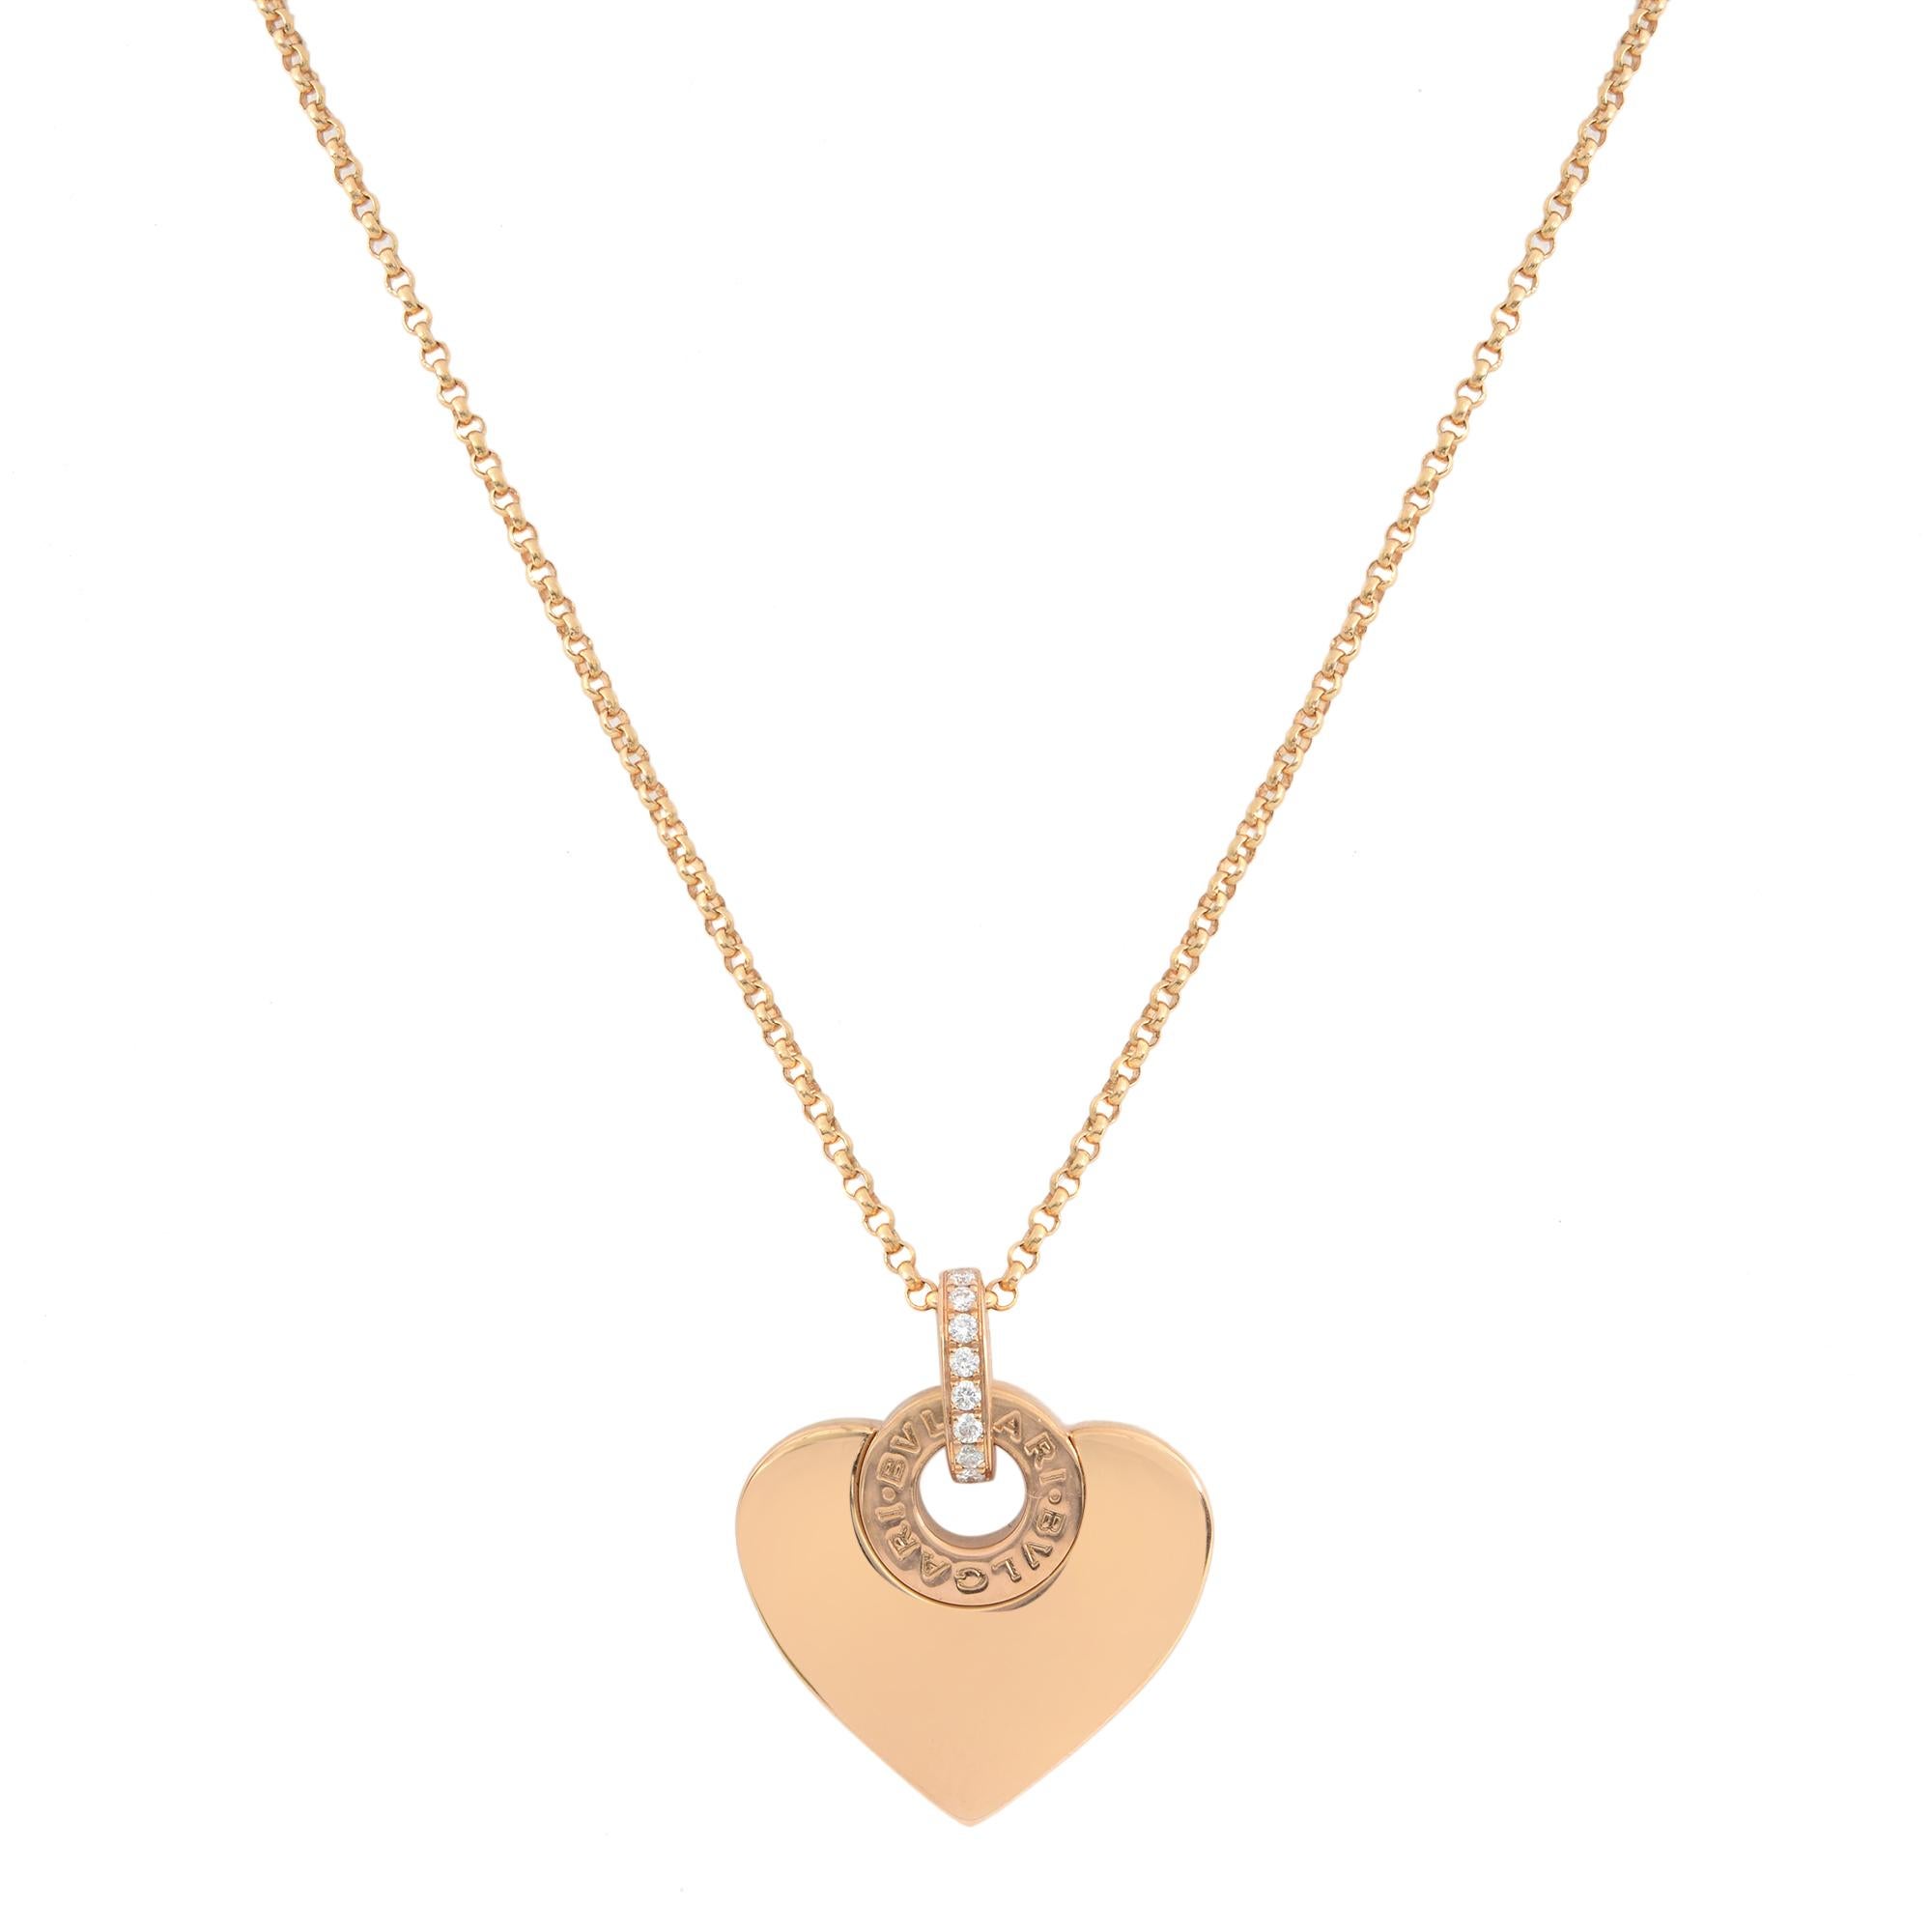 A Bvlgari necklace from the Bvlgari Bvlgari collection. This Necklace is crafted in 18kt pink gold and features a 